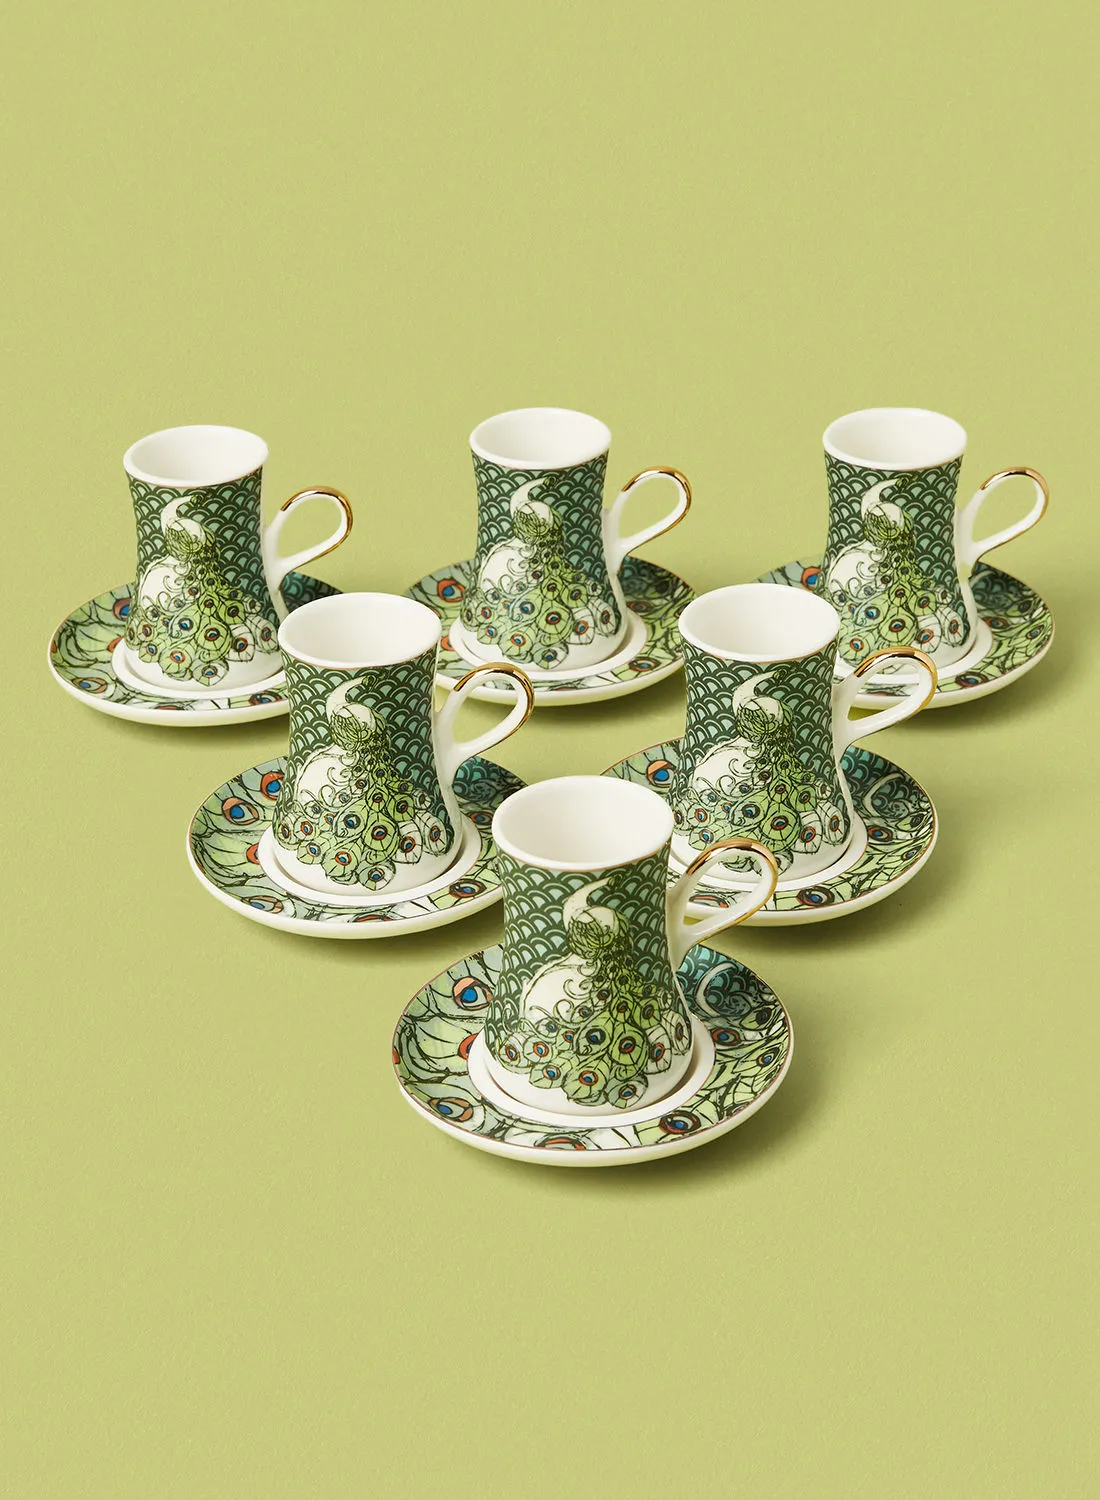 noon east 12 Piece Cup And Saucer Set - New Bone China - Premium Quality Arabic Tea And Coffee Cups Set - Coffee Cups - Tea Cups - Arabic Coffee Cups - Peacock